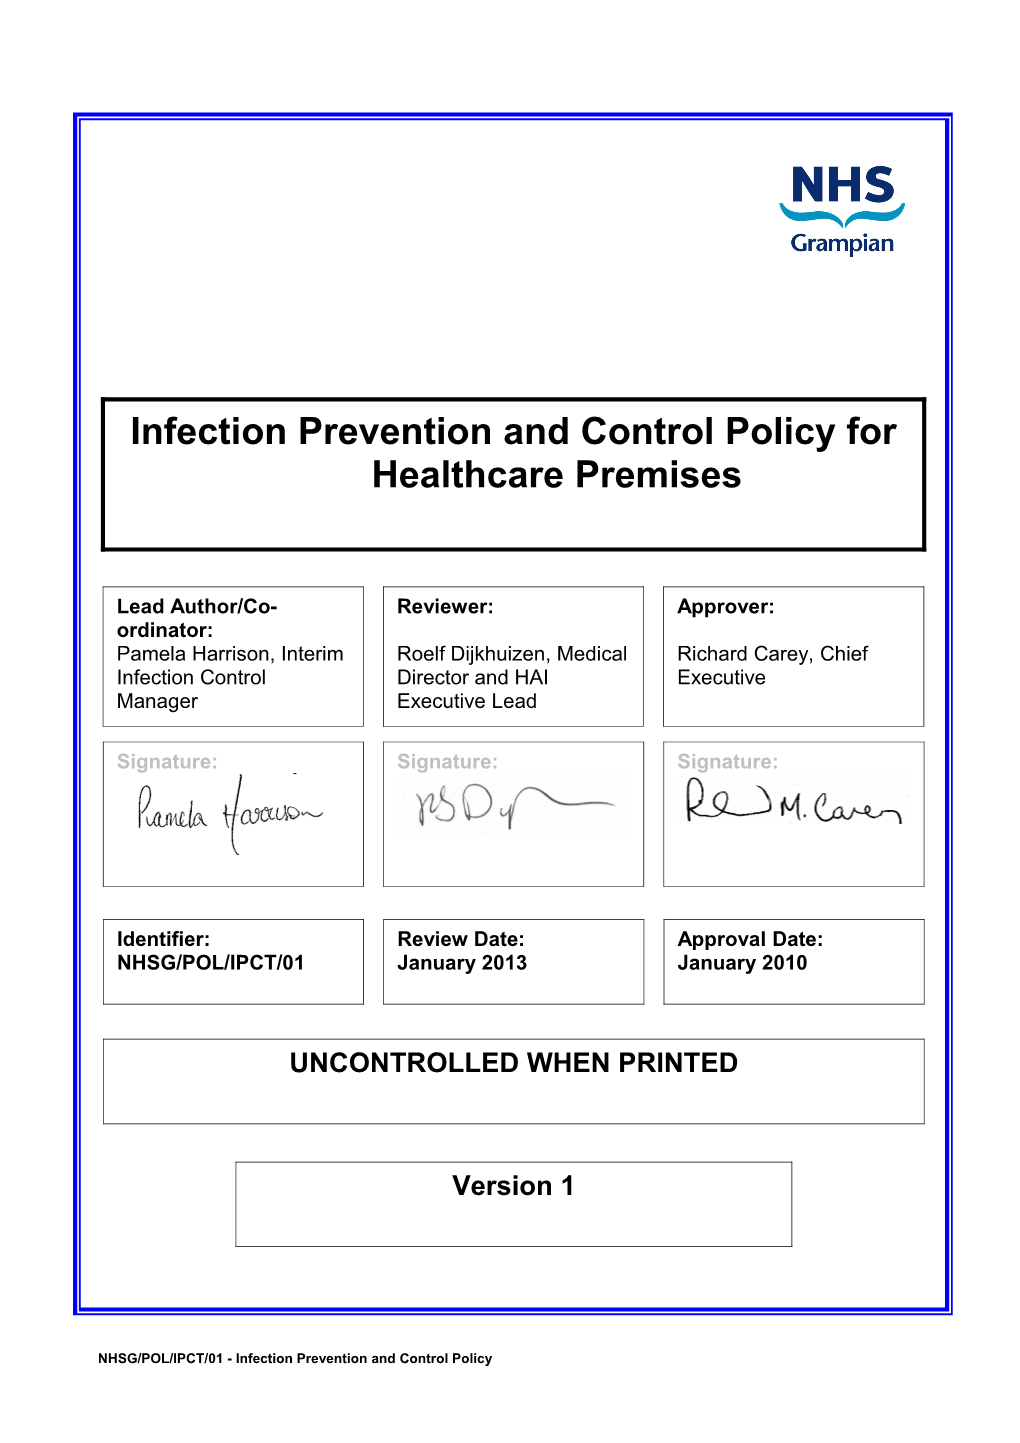 Item 7.2 for 2 Feb 10 Infection Prevention and Control Policy